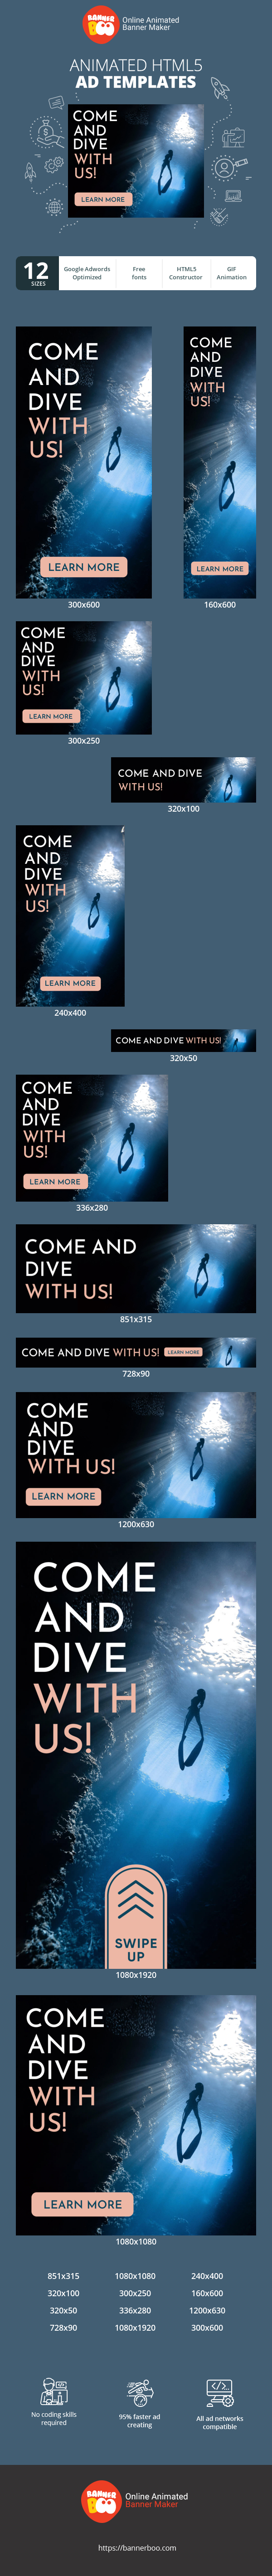 Banner ad template — Come And Dive With Us — Travel Agency